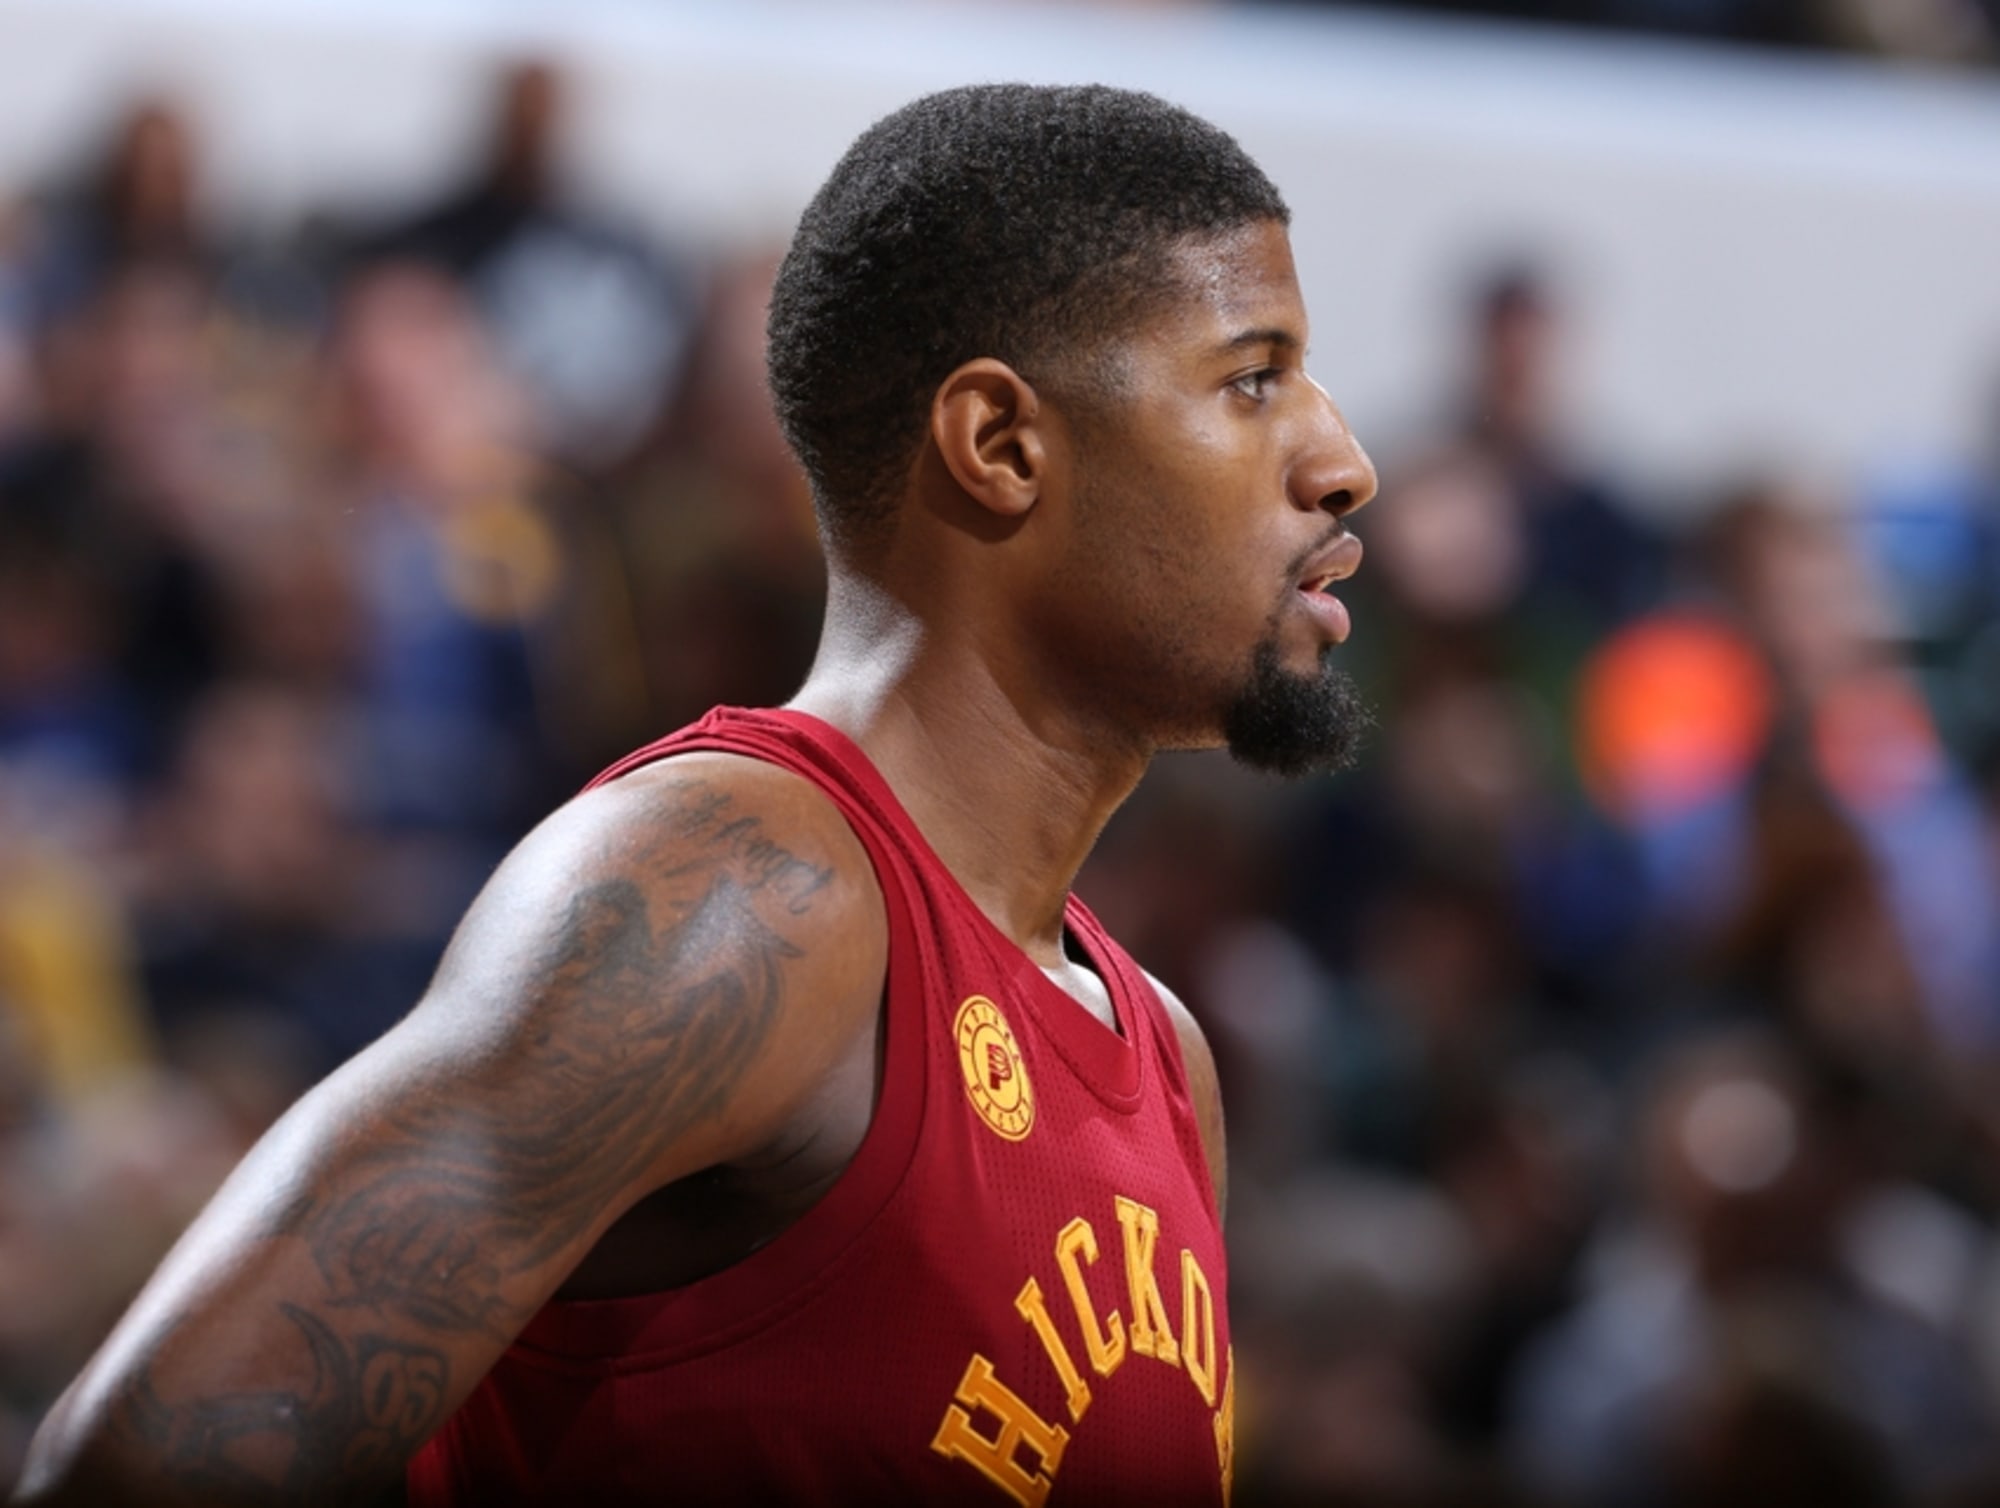 Paul George returns to Indianapolis as a member of the LA Clippers